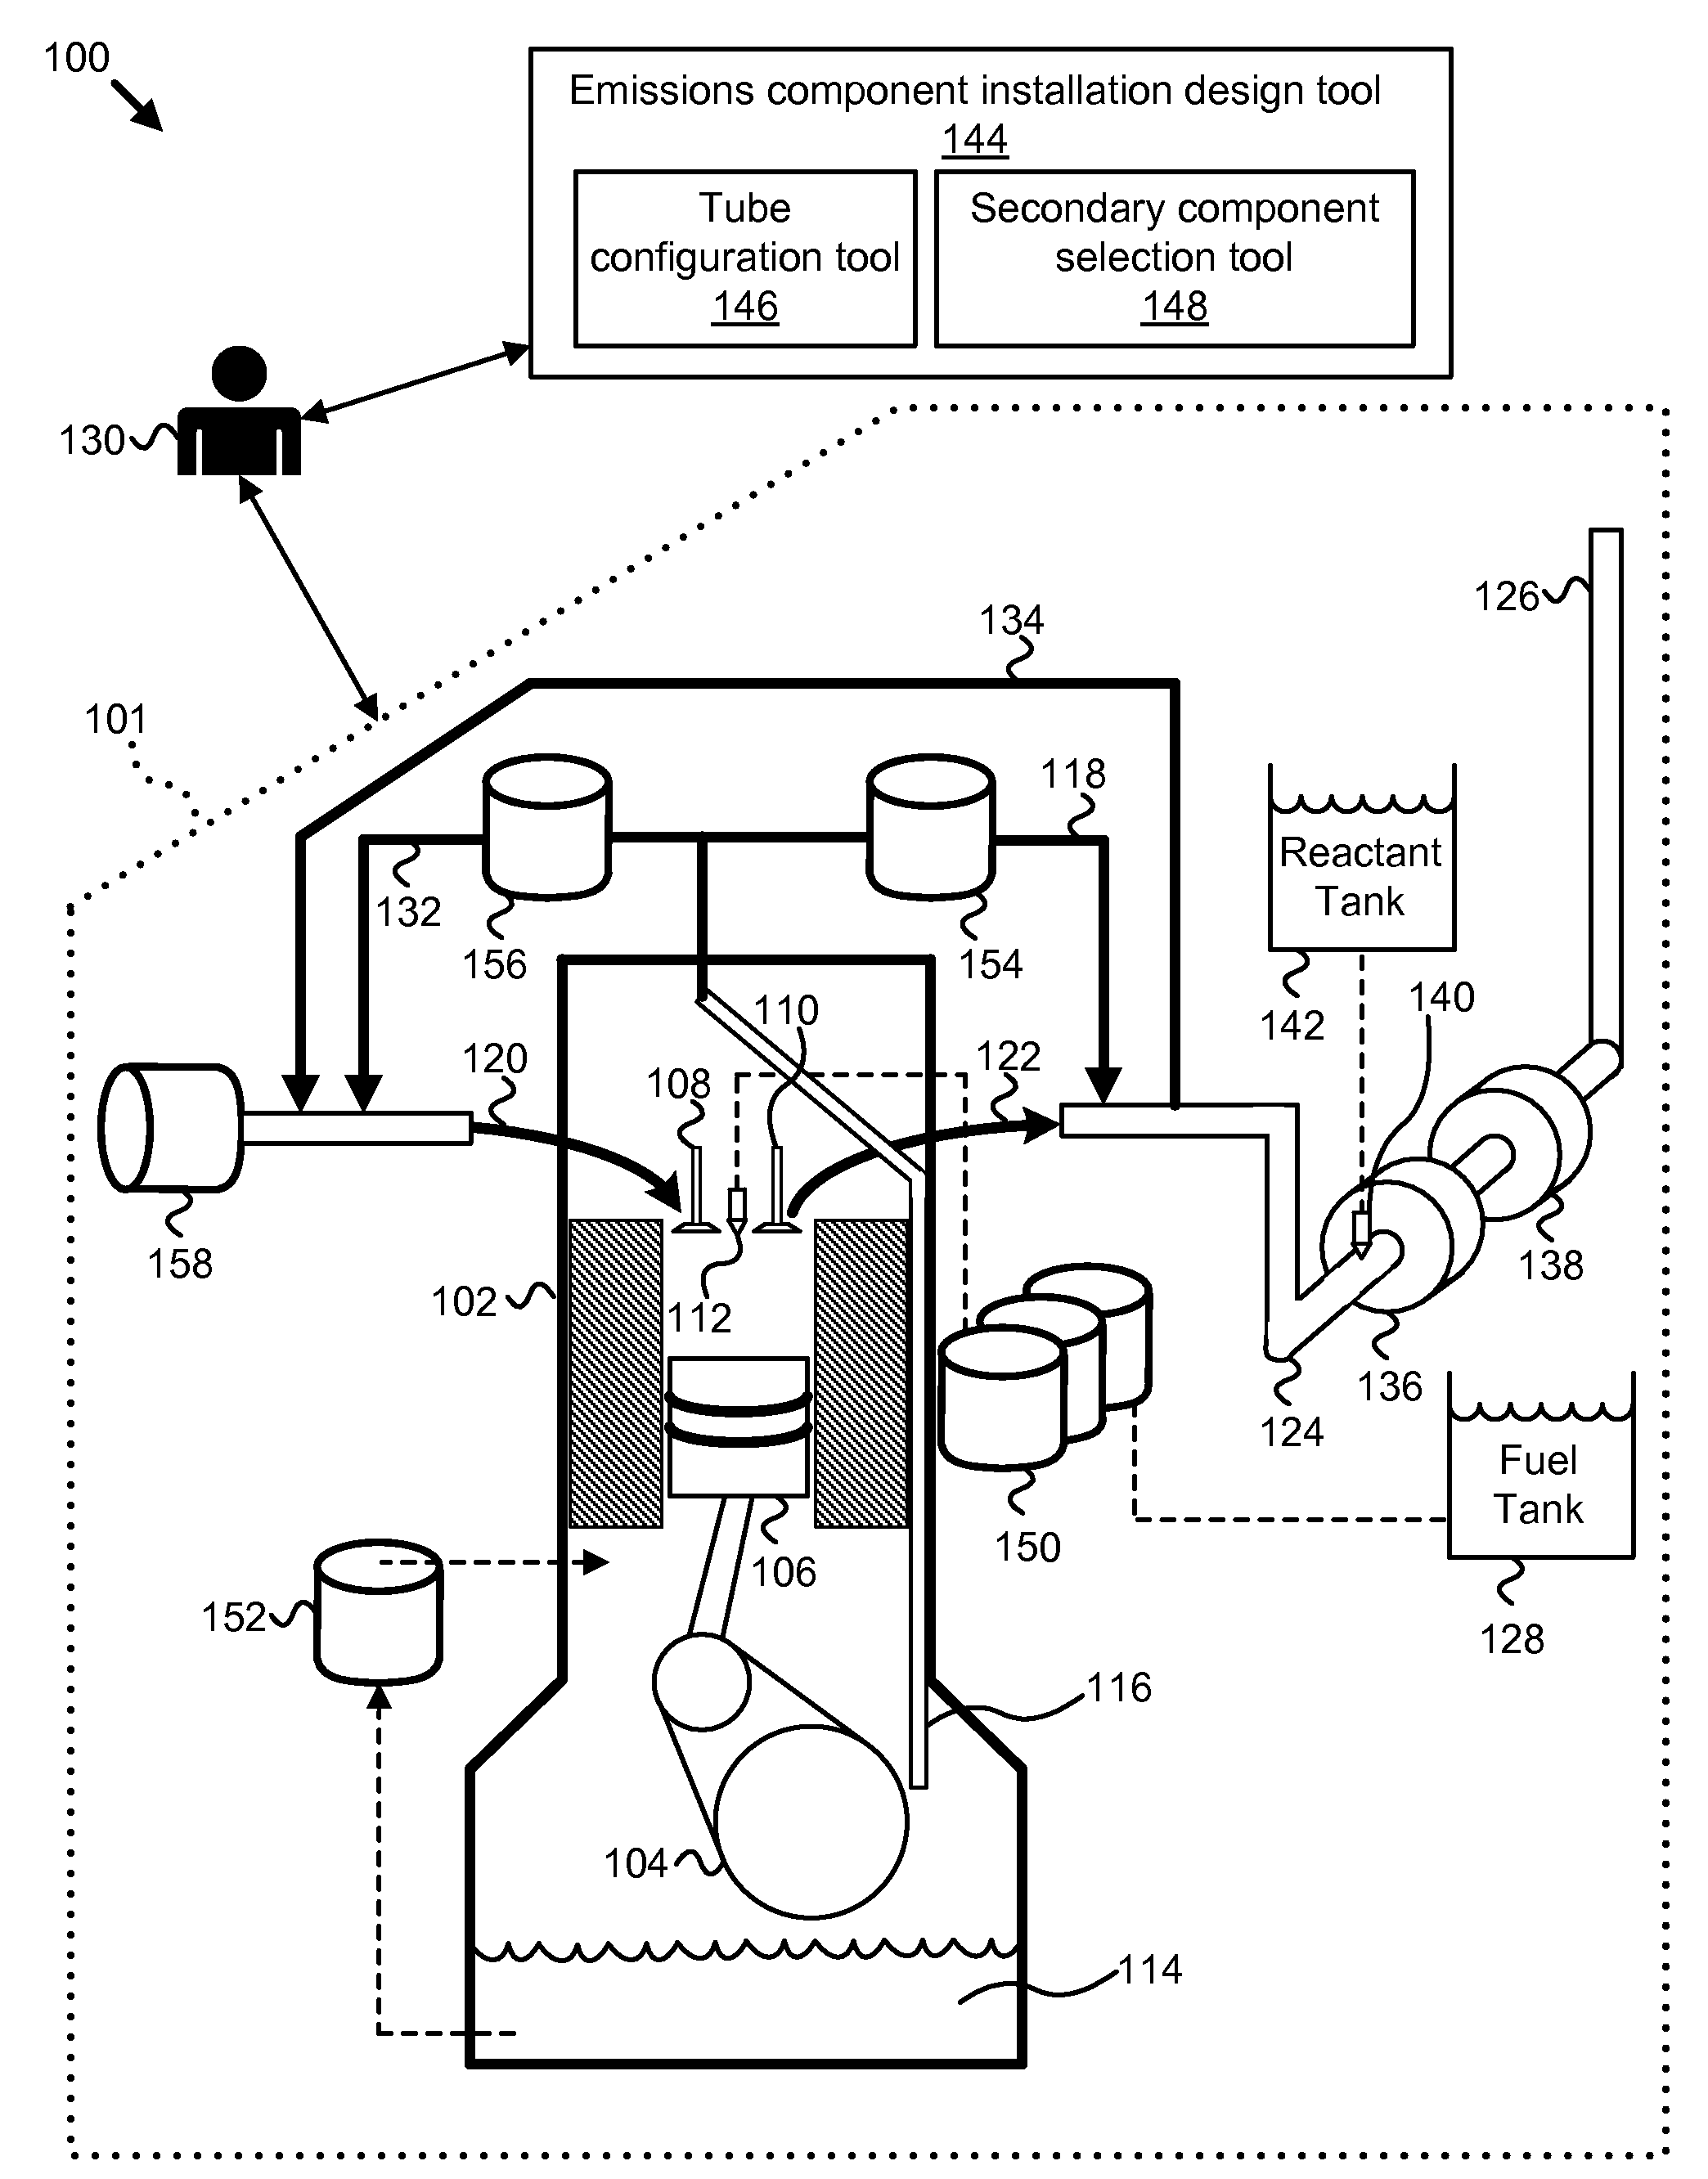 Apparatus, system, and method for rapid design of emissions component installations